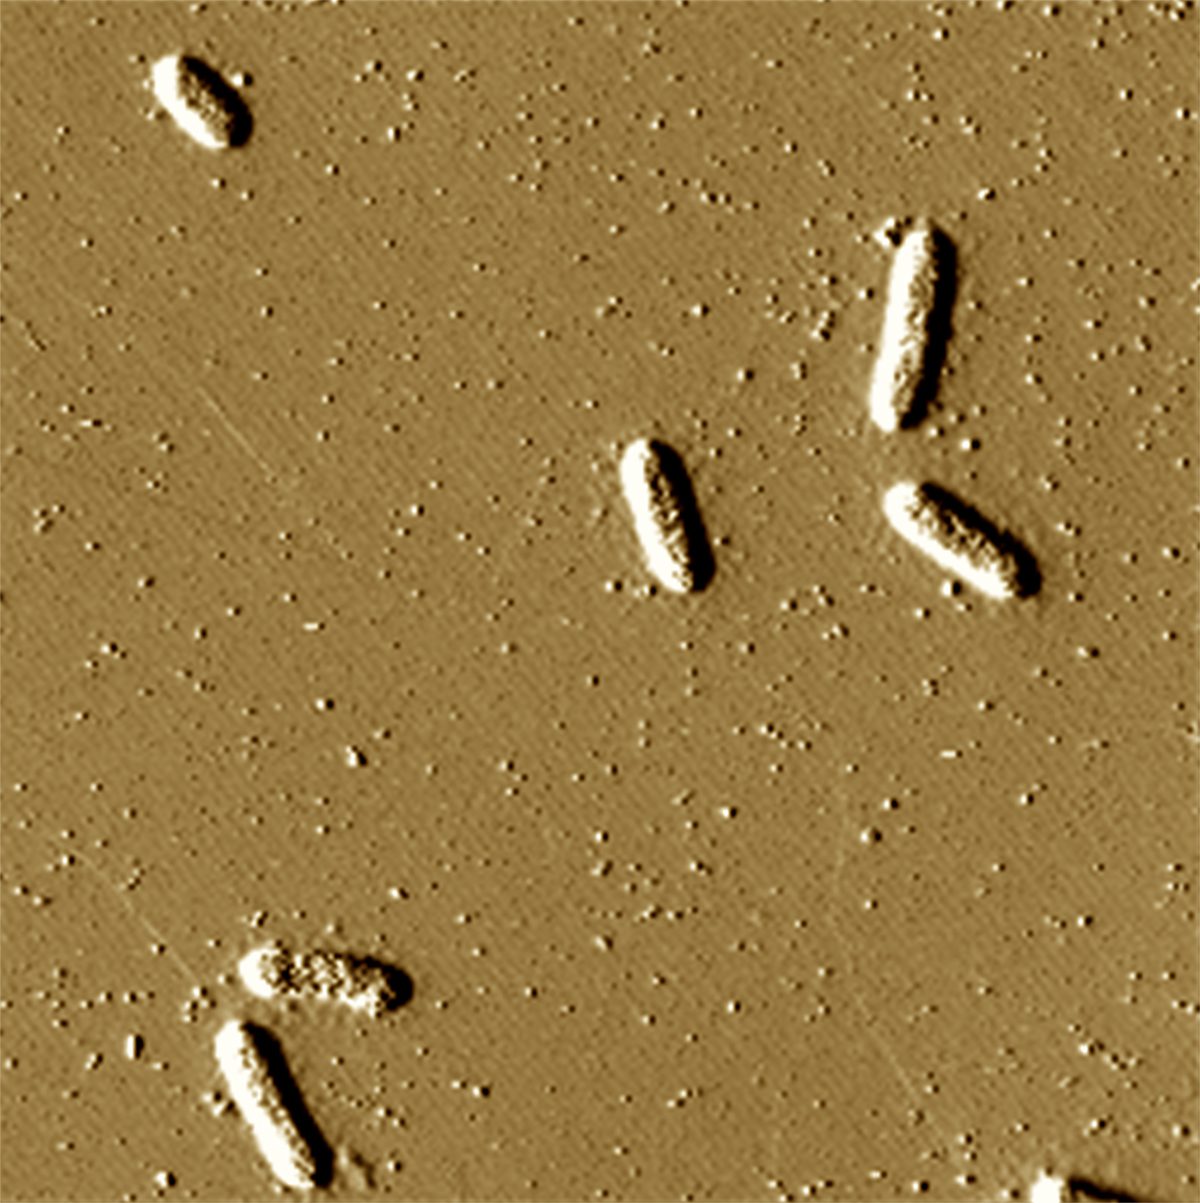 Spartan researchers have revealed that Geobacter bacteria — the rod-like shapes in this microscope image — package uranium into vesicles, which are seen as the light specks dotting the image. Credit: Morgen Clark